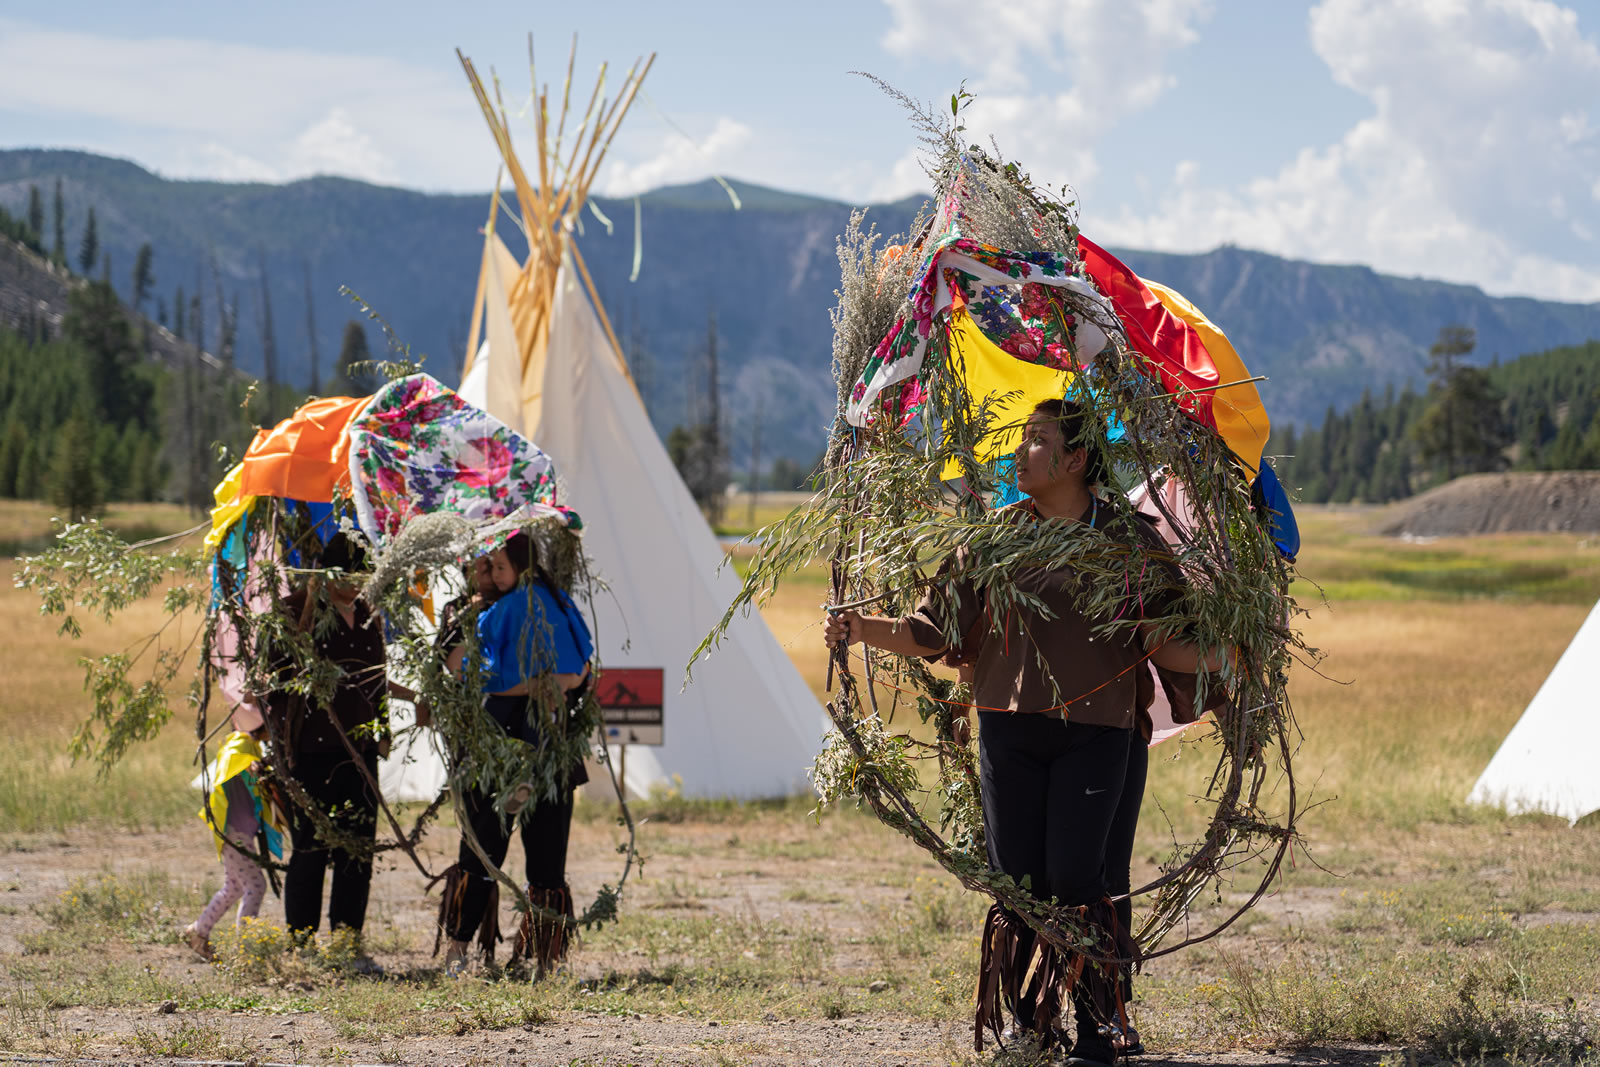 Dancers and their buffalo sculptures. The buffalo sculptures were built using willow branches, red willow (water birch) branches, sage, twine, and silk handkerchiefs. (Photo GYC/Emmy Reed)